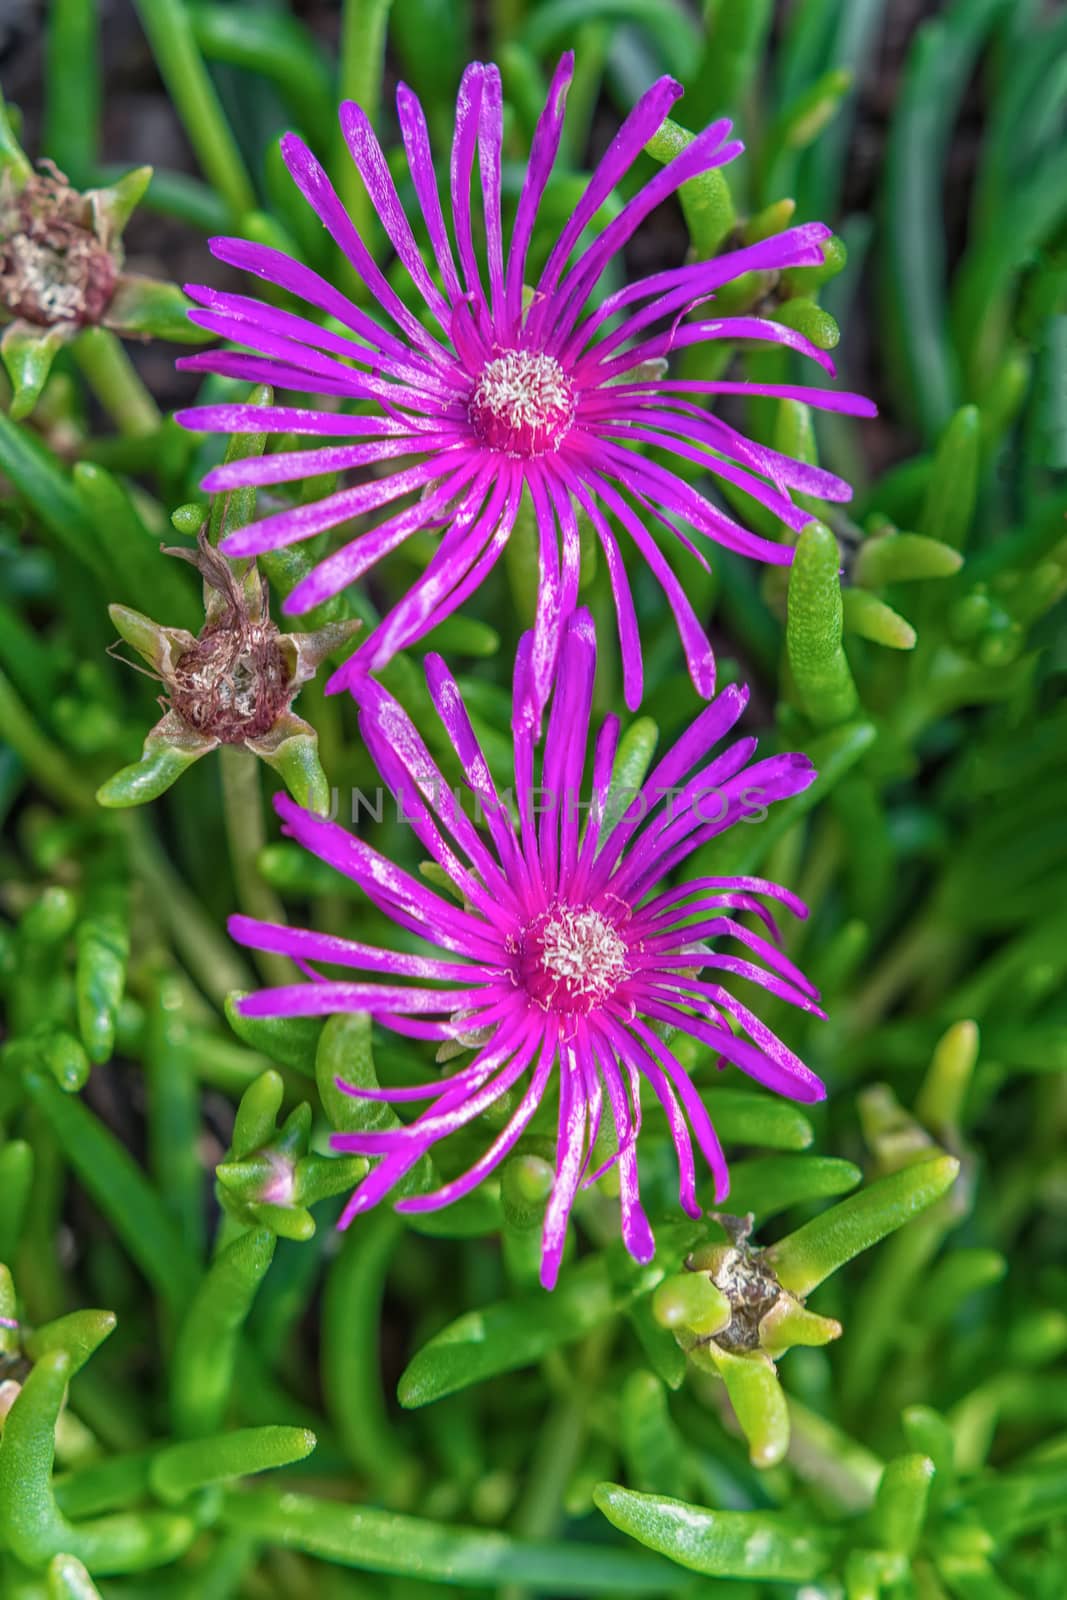 Violet flowers on a blured green background